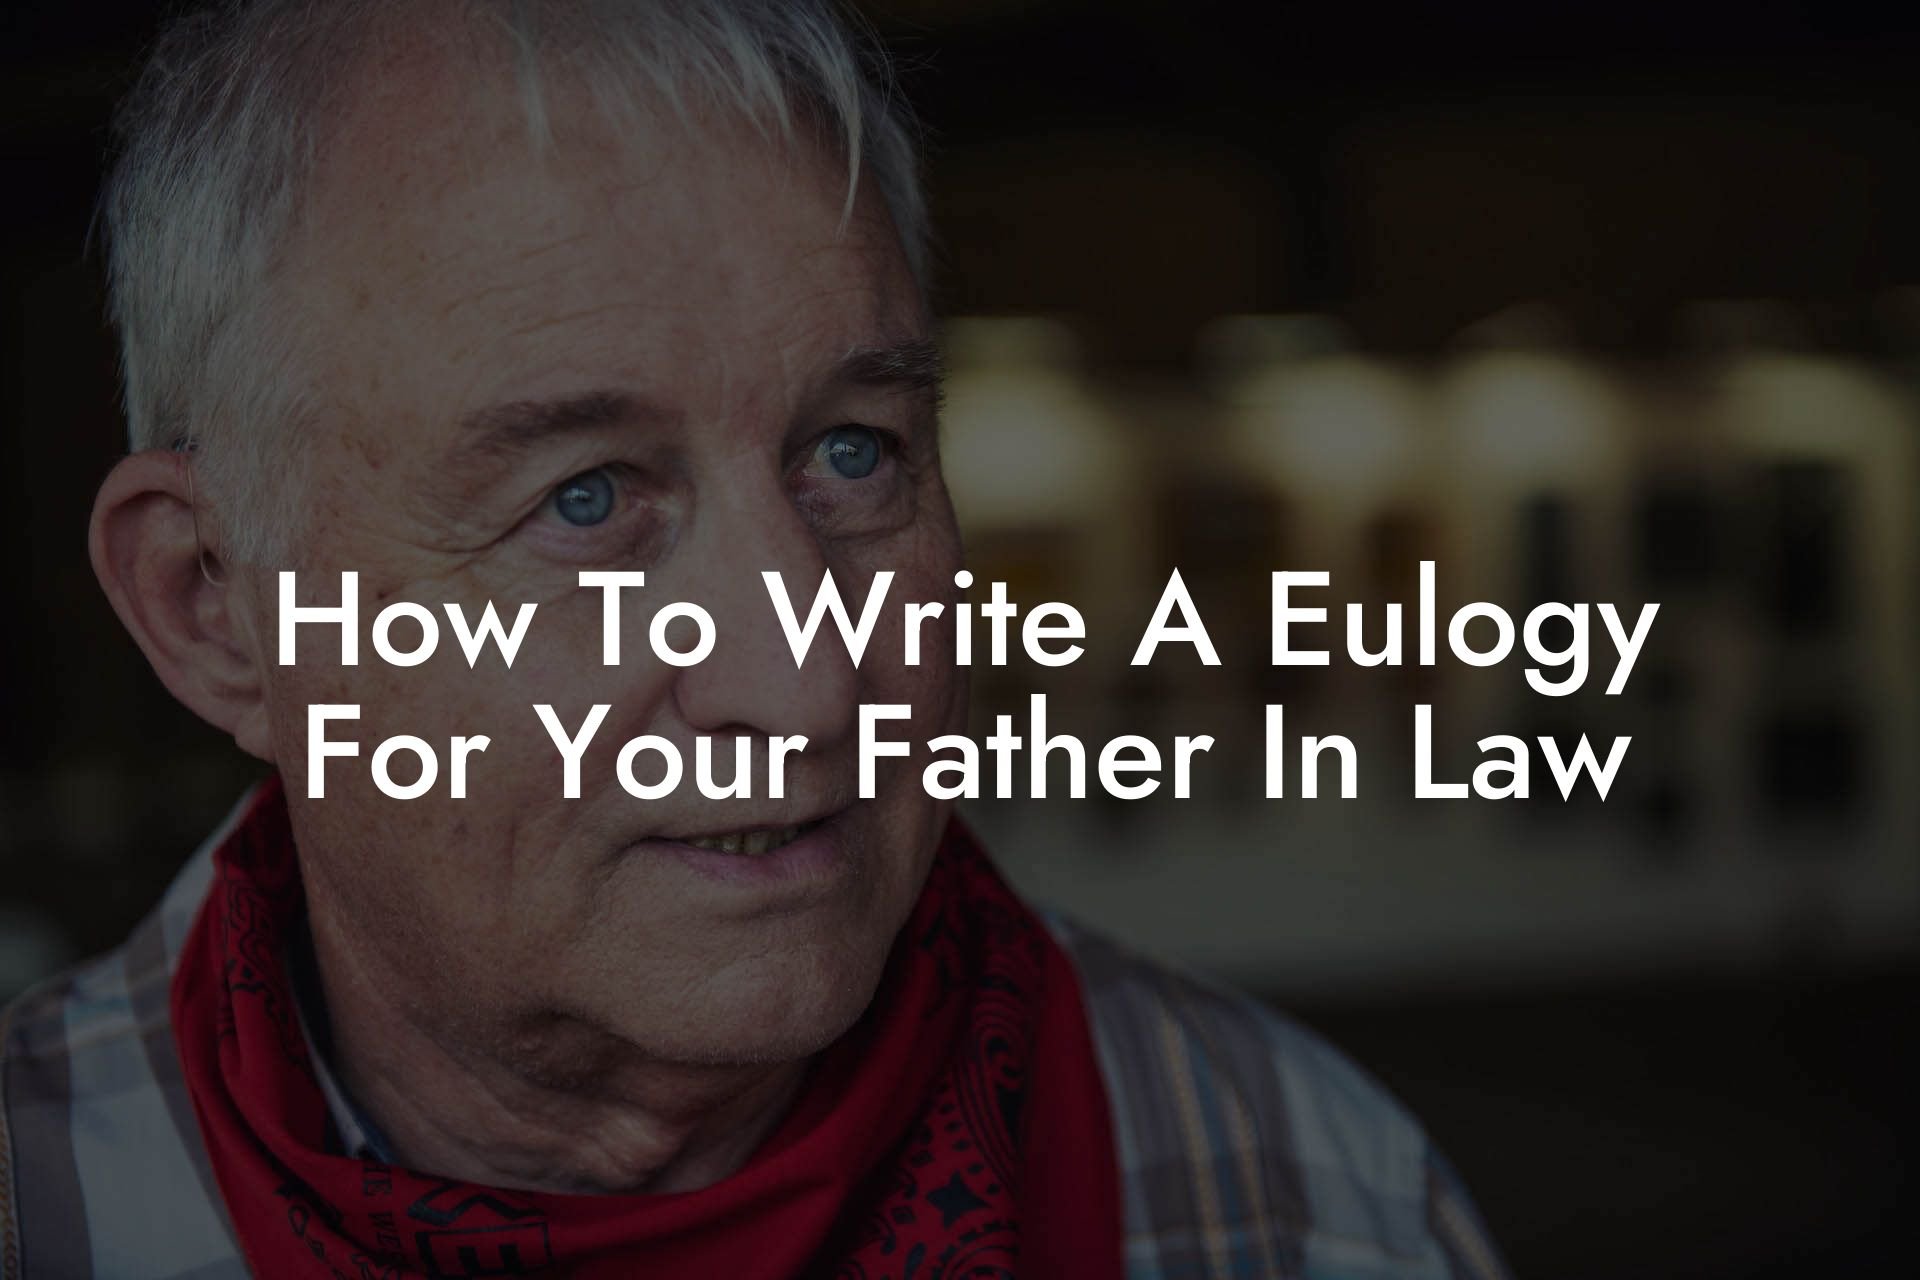 How To Write A Eulogy For Your Father In Law